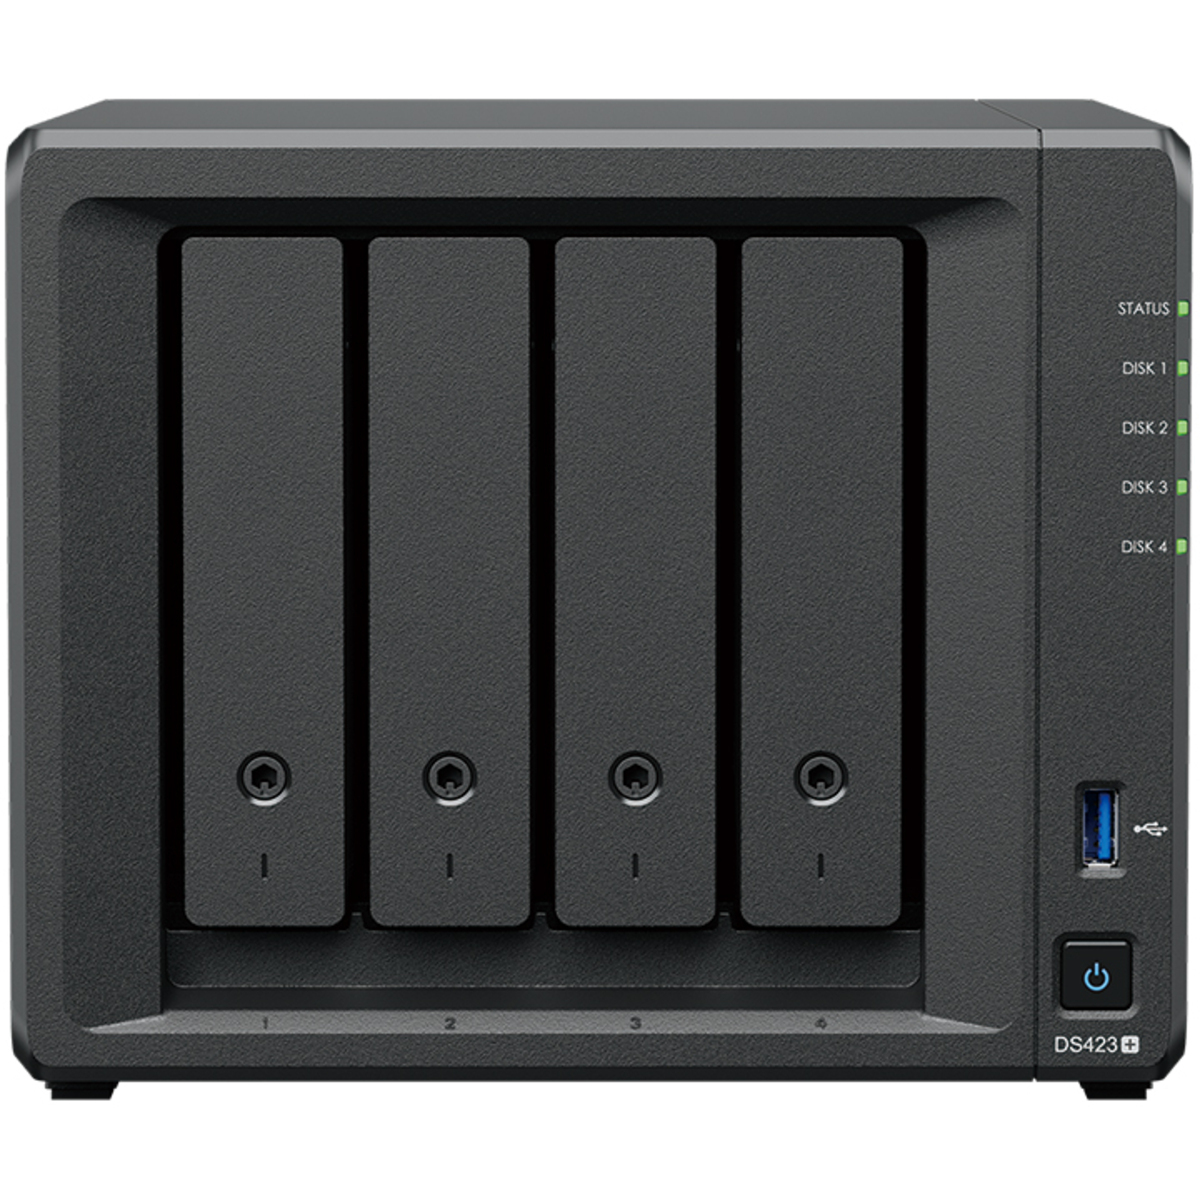 Synology DiskStation DS423+ 1.9tb 4-Bay Desktop Multimedia / Power User / Business NAS - Network Attached Storage Device 2x960gb Synology SAT5210 Series SAT5210-960G 2.5 530/500MB/s SATA 6Gb/s SSD ENTERPRISE Class Drives Installed - Burn-In Tested - FREE RAM UPGRADE DiskStation DS423+